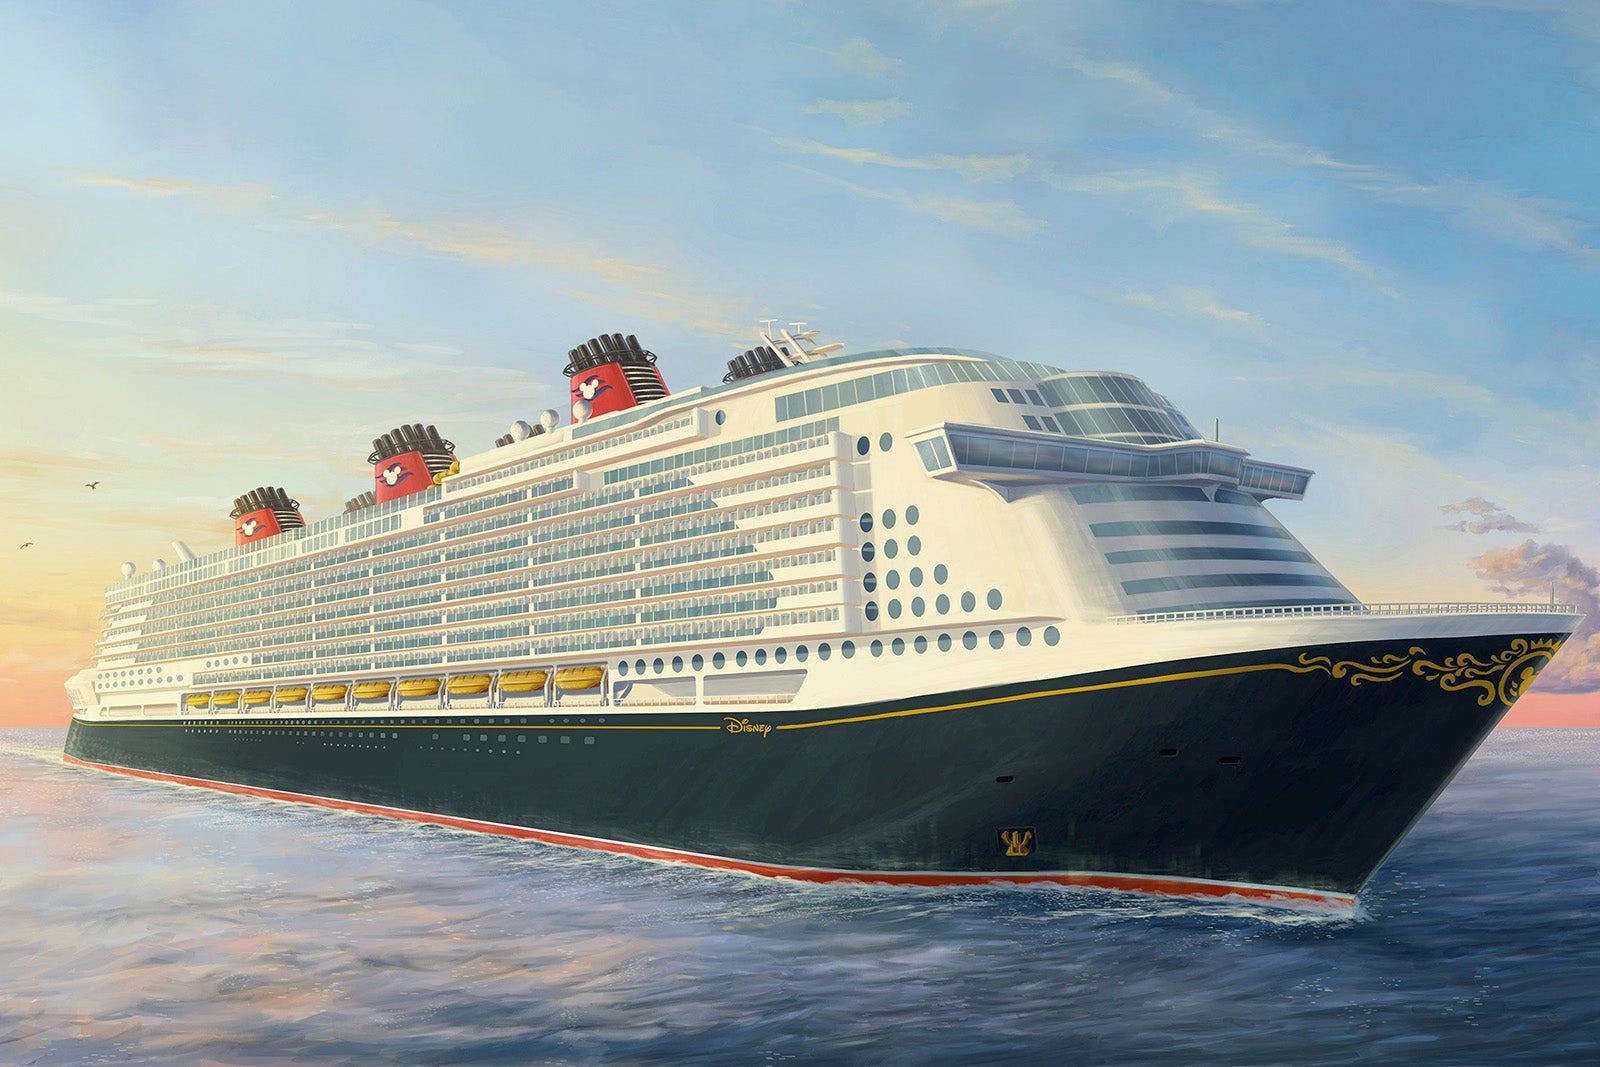 Early artist concept rendering depicts a new Disney Cruise Line ship in the iconic, Mickey Mouse-inspired colors of the fleet. Disney announced the acquisition of a partially completed ship that will bring the magic of a Disney vacation to new global destinations. The ship will be renamed with certain features reimagined under the world-renowned expertise of Walt Disney Imagineers.